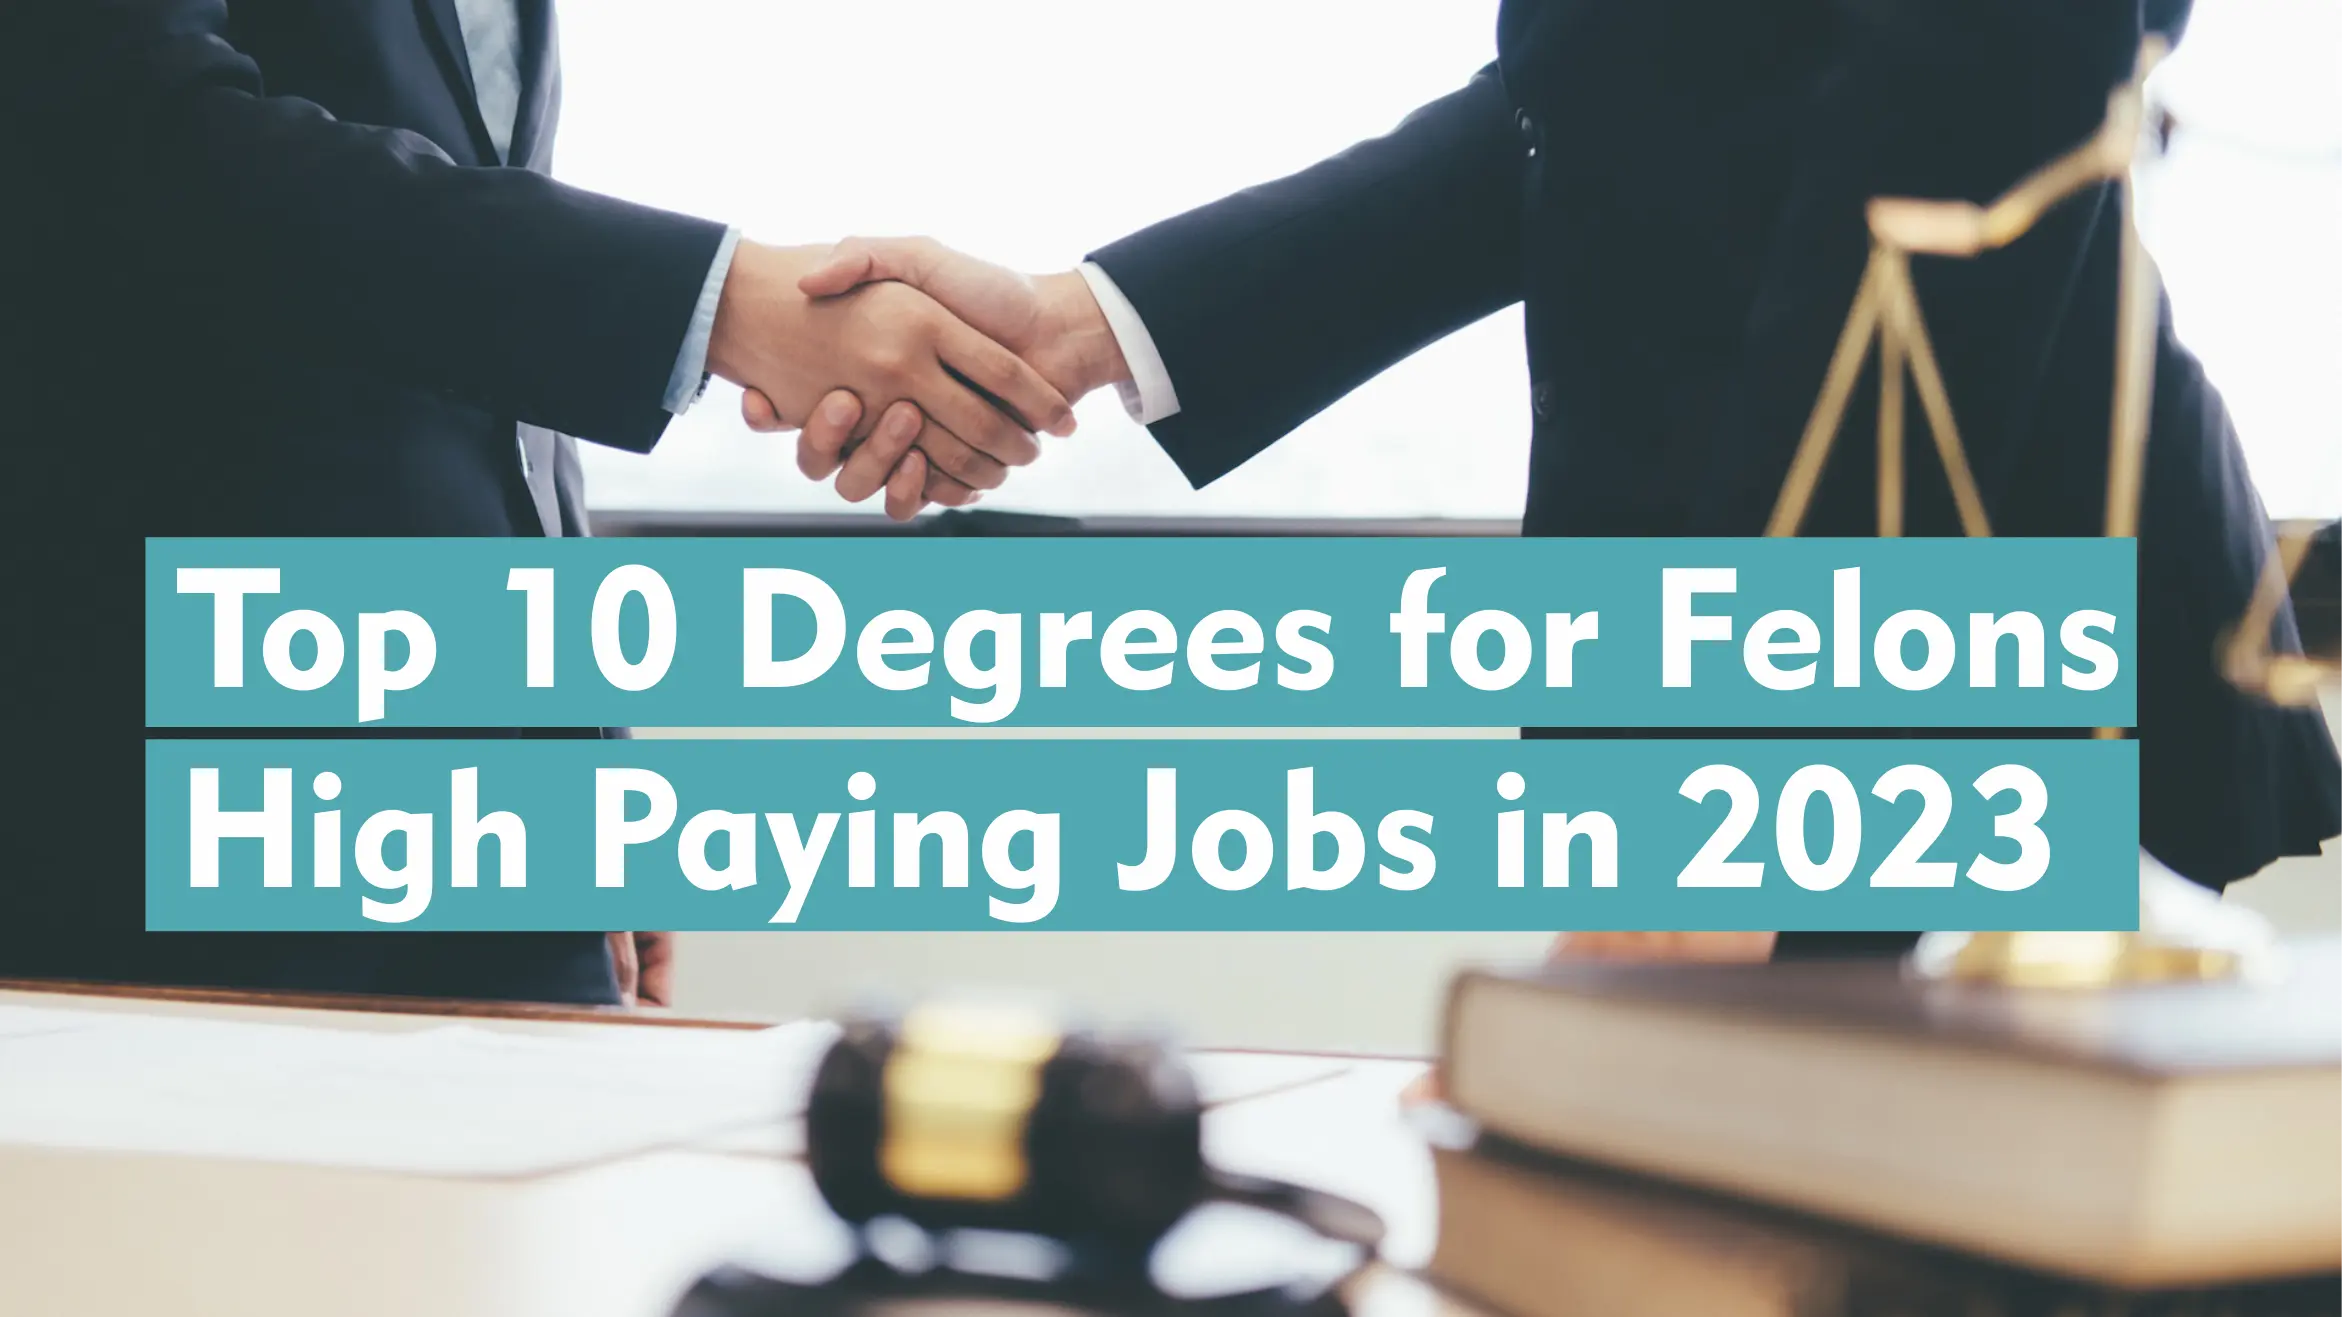 Top 10 Degrees for Felons - High Paying Jobs in 2023